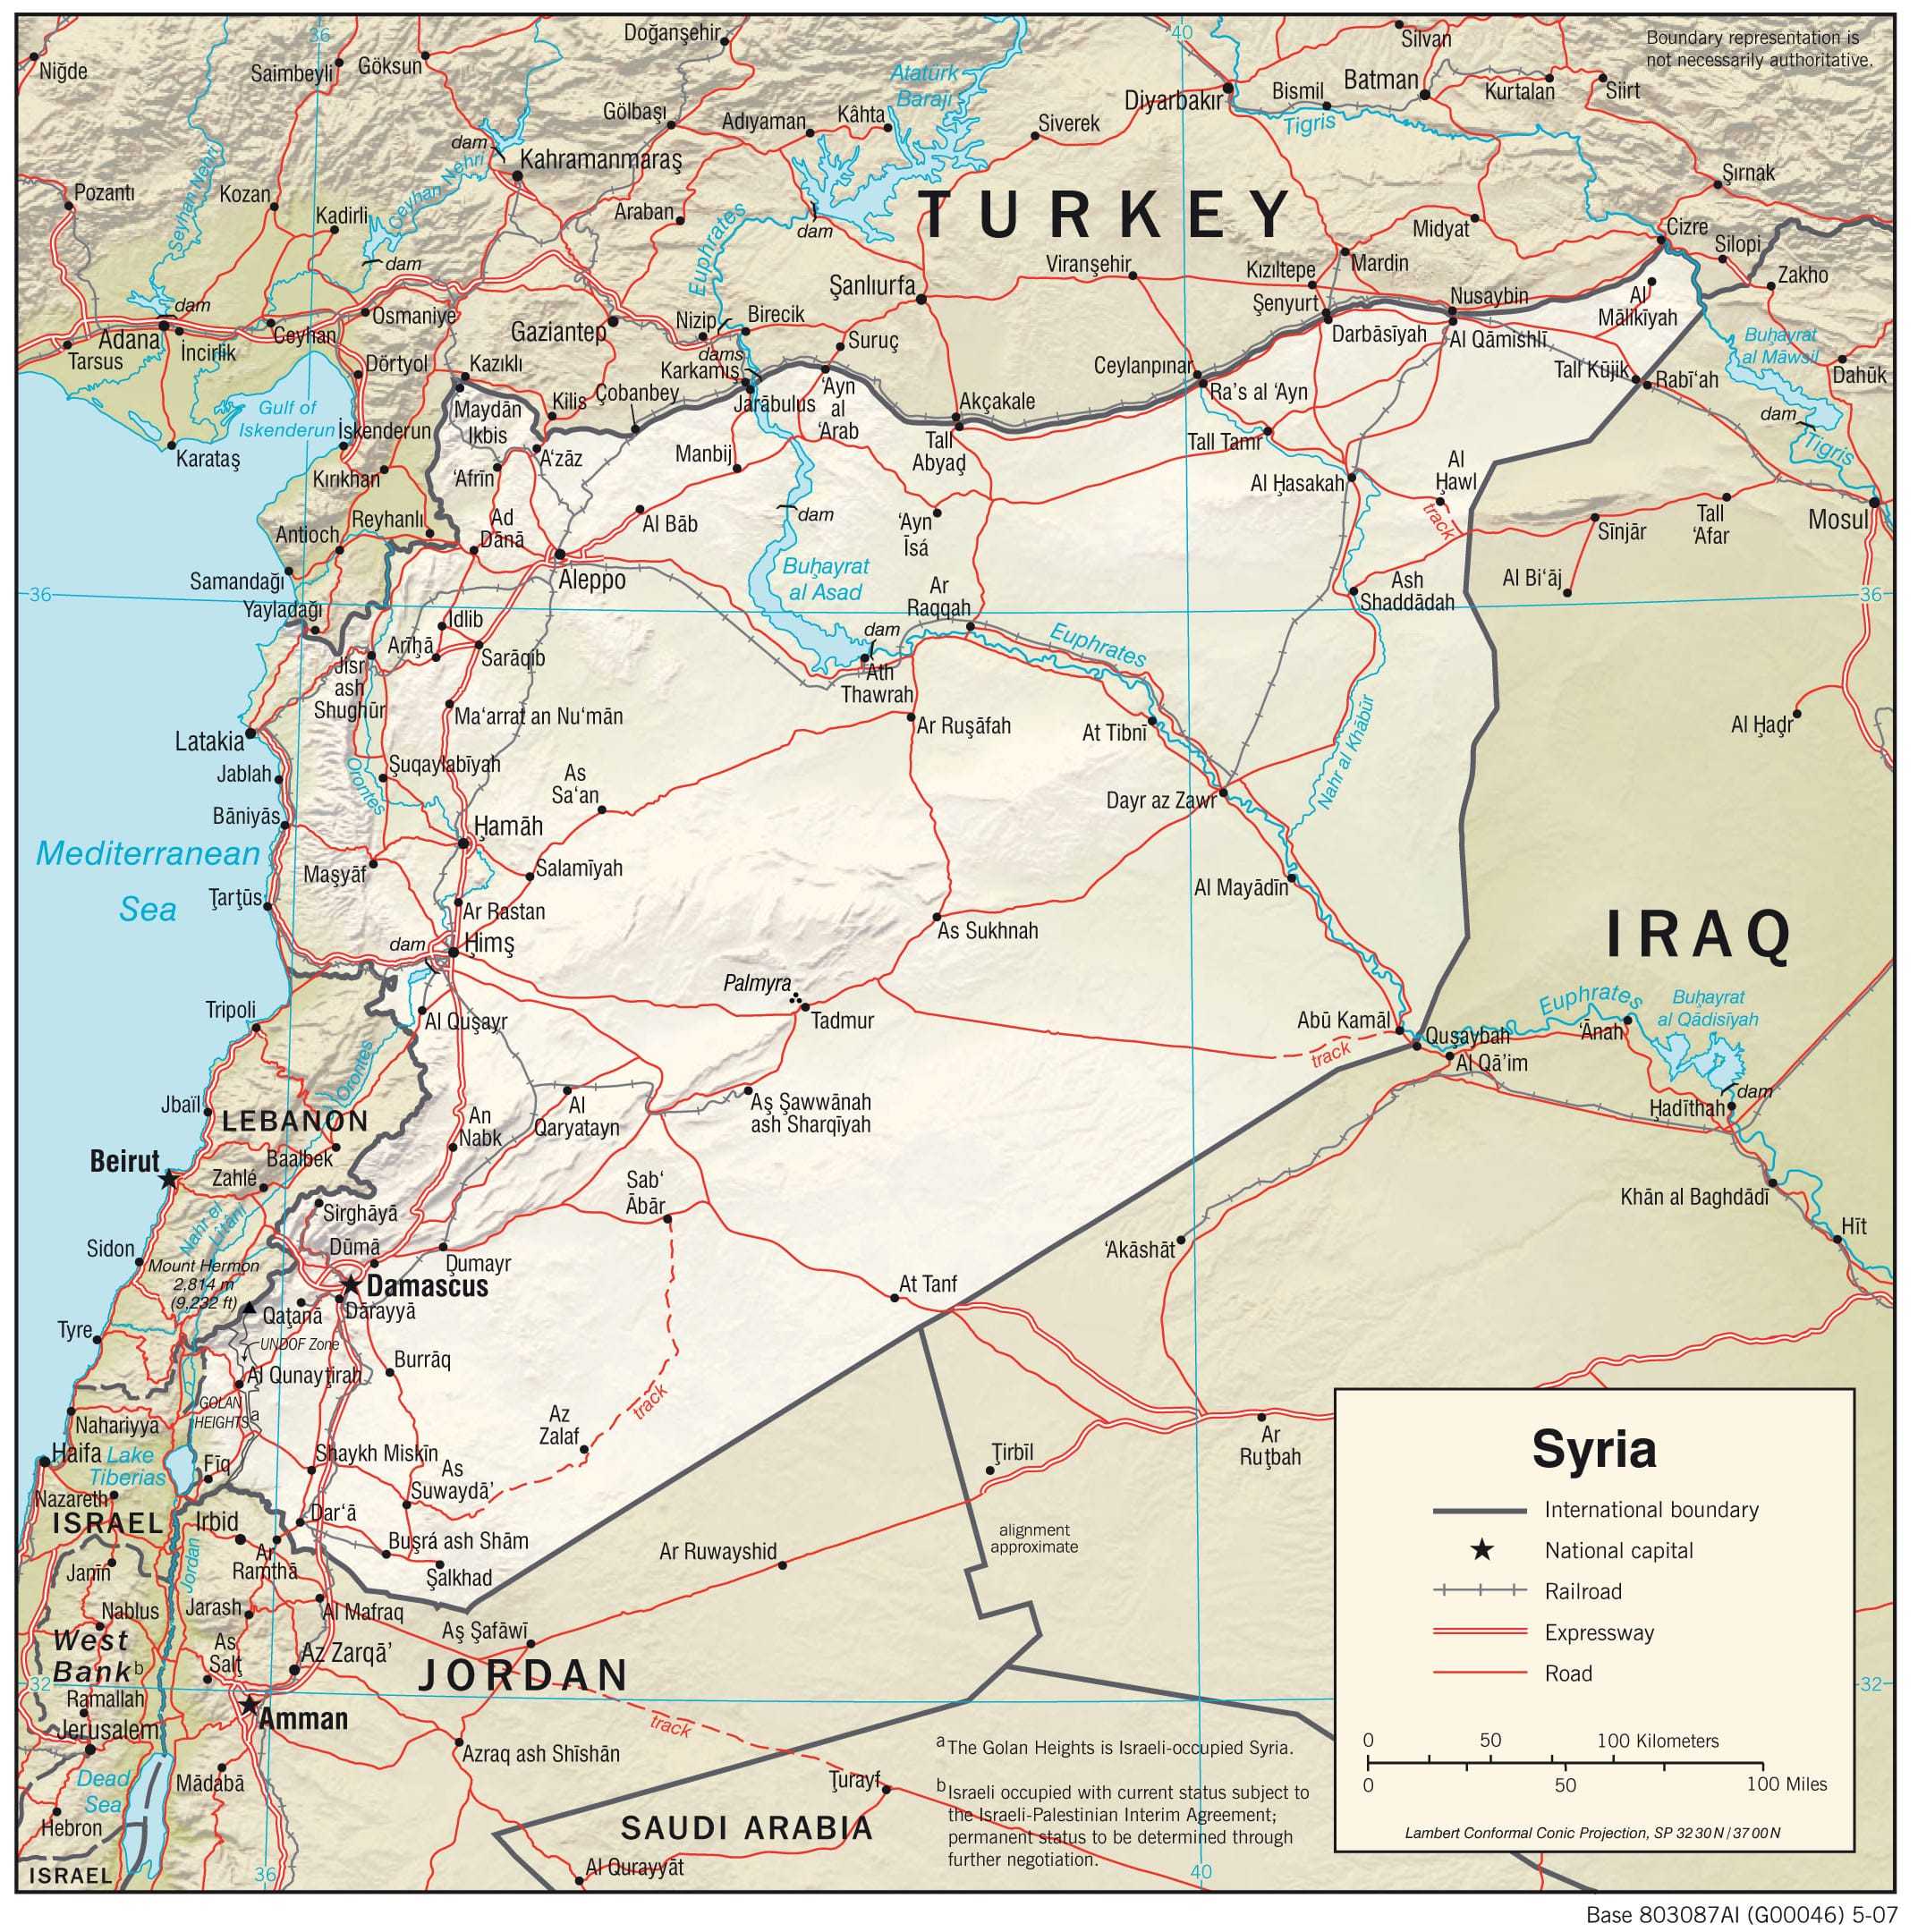 Physiographical map of Syria.